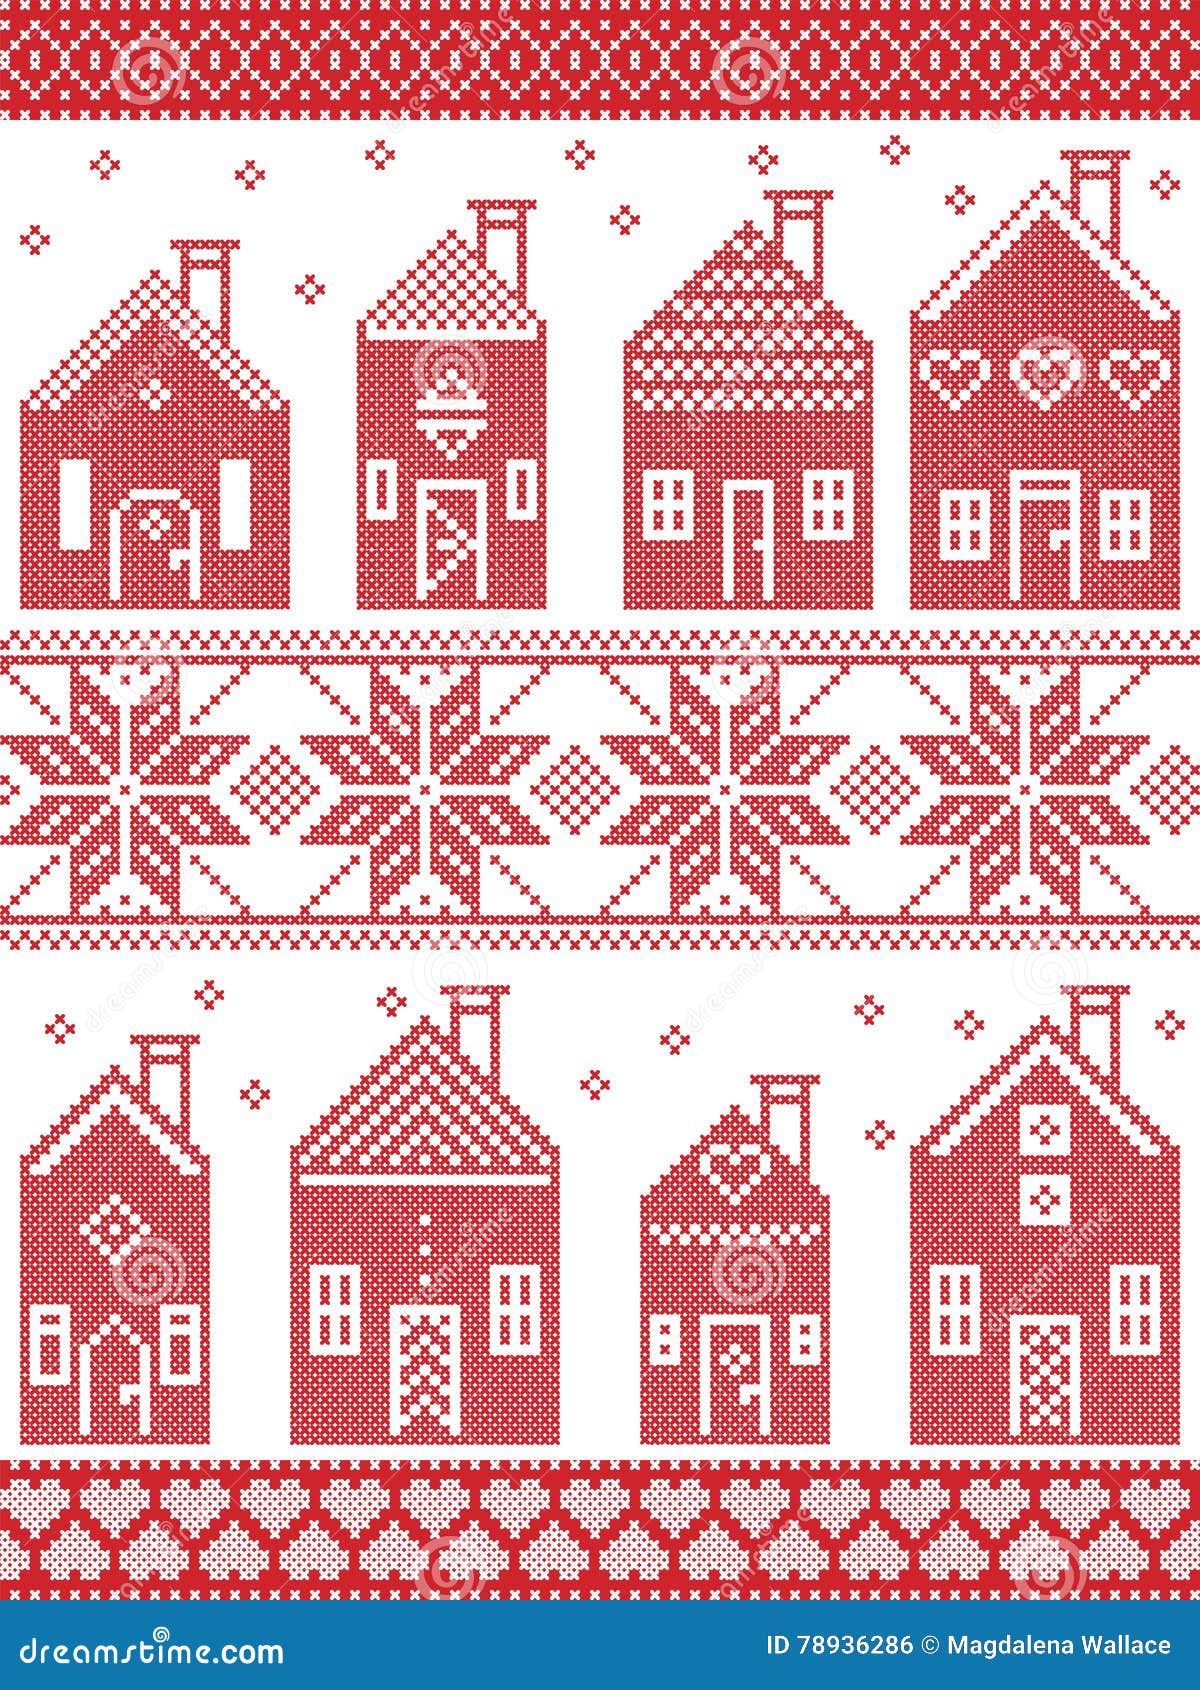 scandinavian style and nordic culture inspired christmas seamless winter pattern including swedish style houses, ornaments